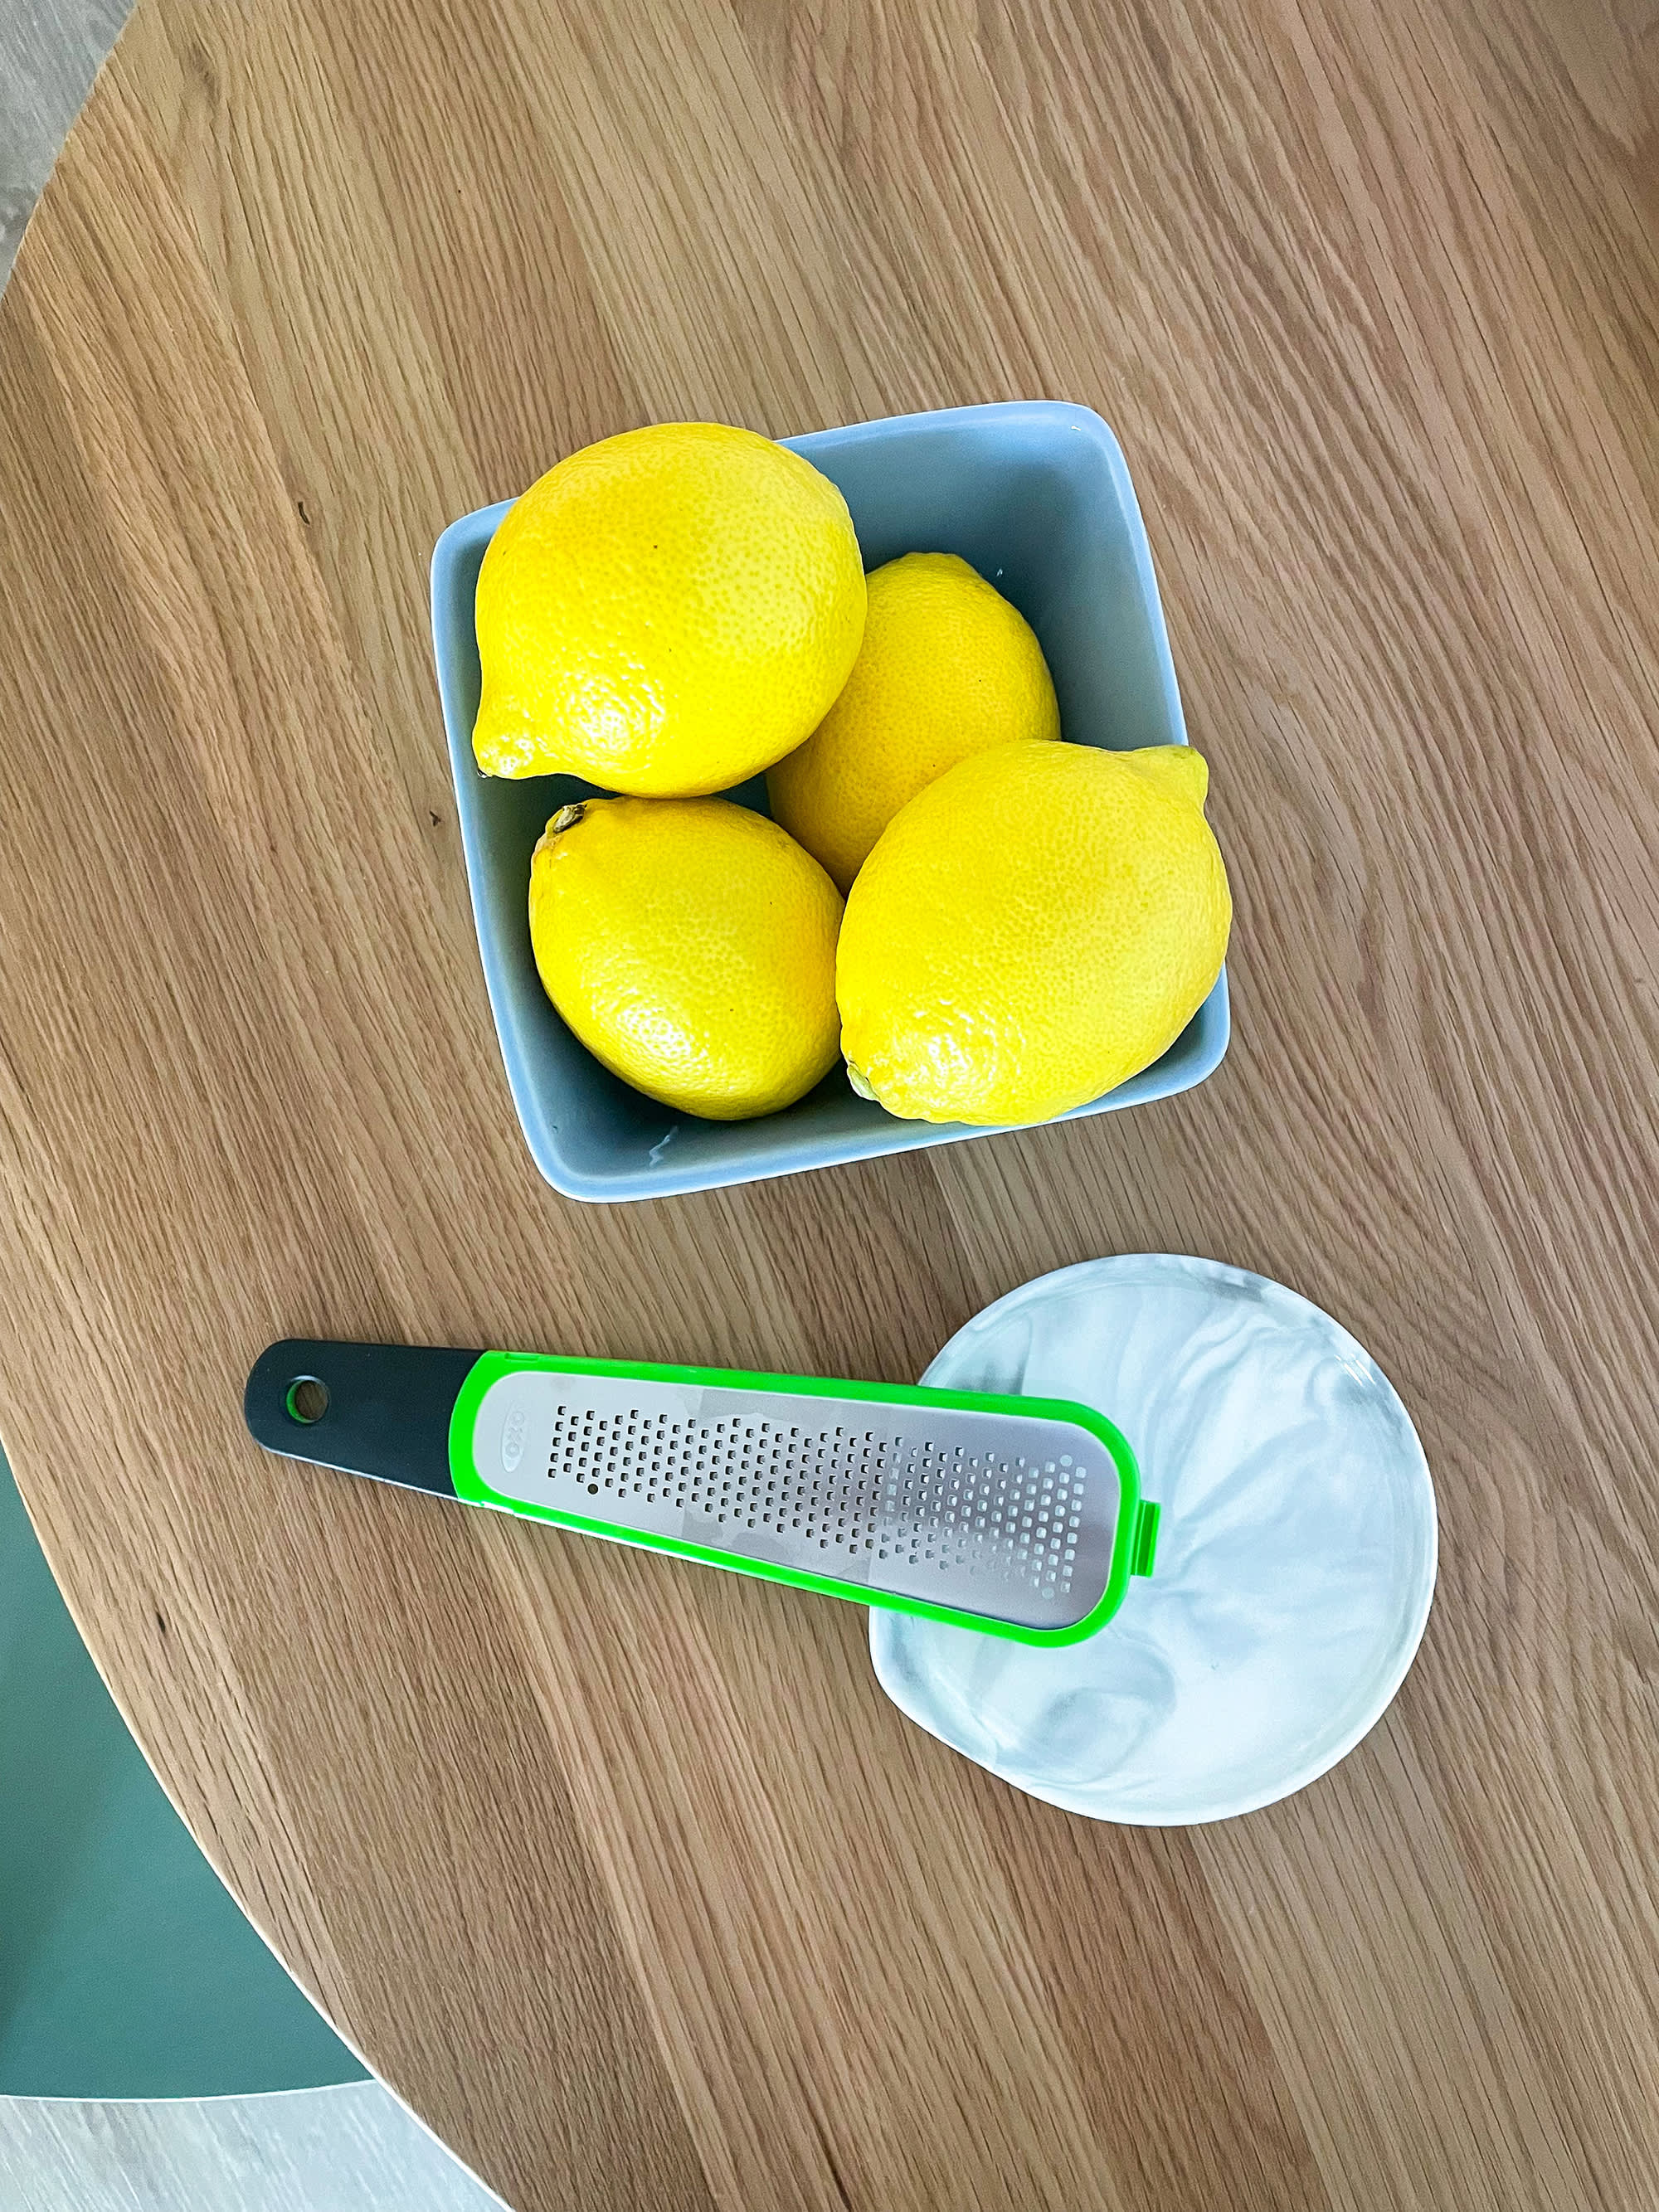 Fakespot  Ourokhome Lemon Zester Cheese Grater Fake Review